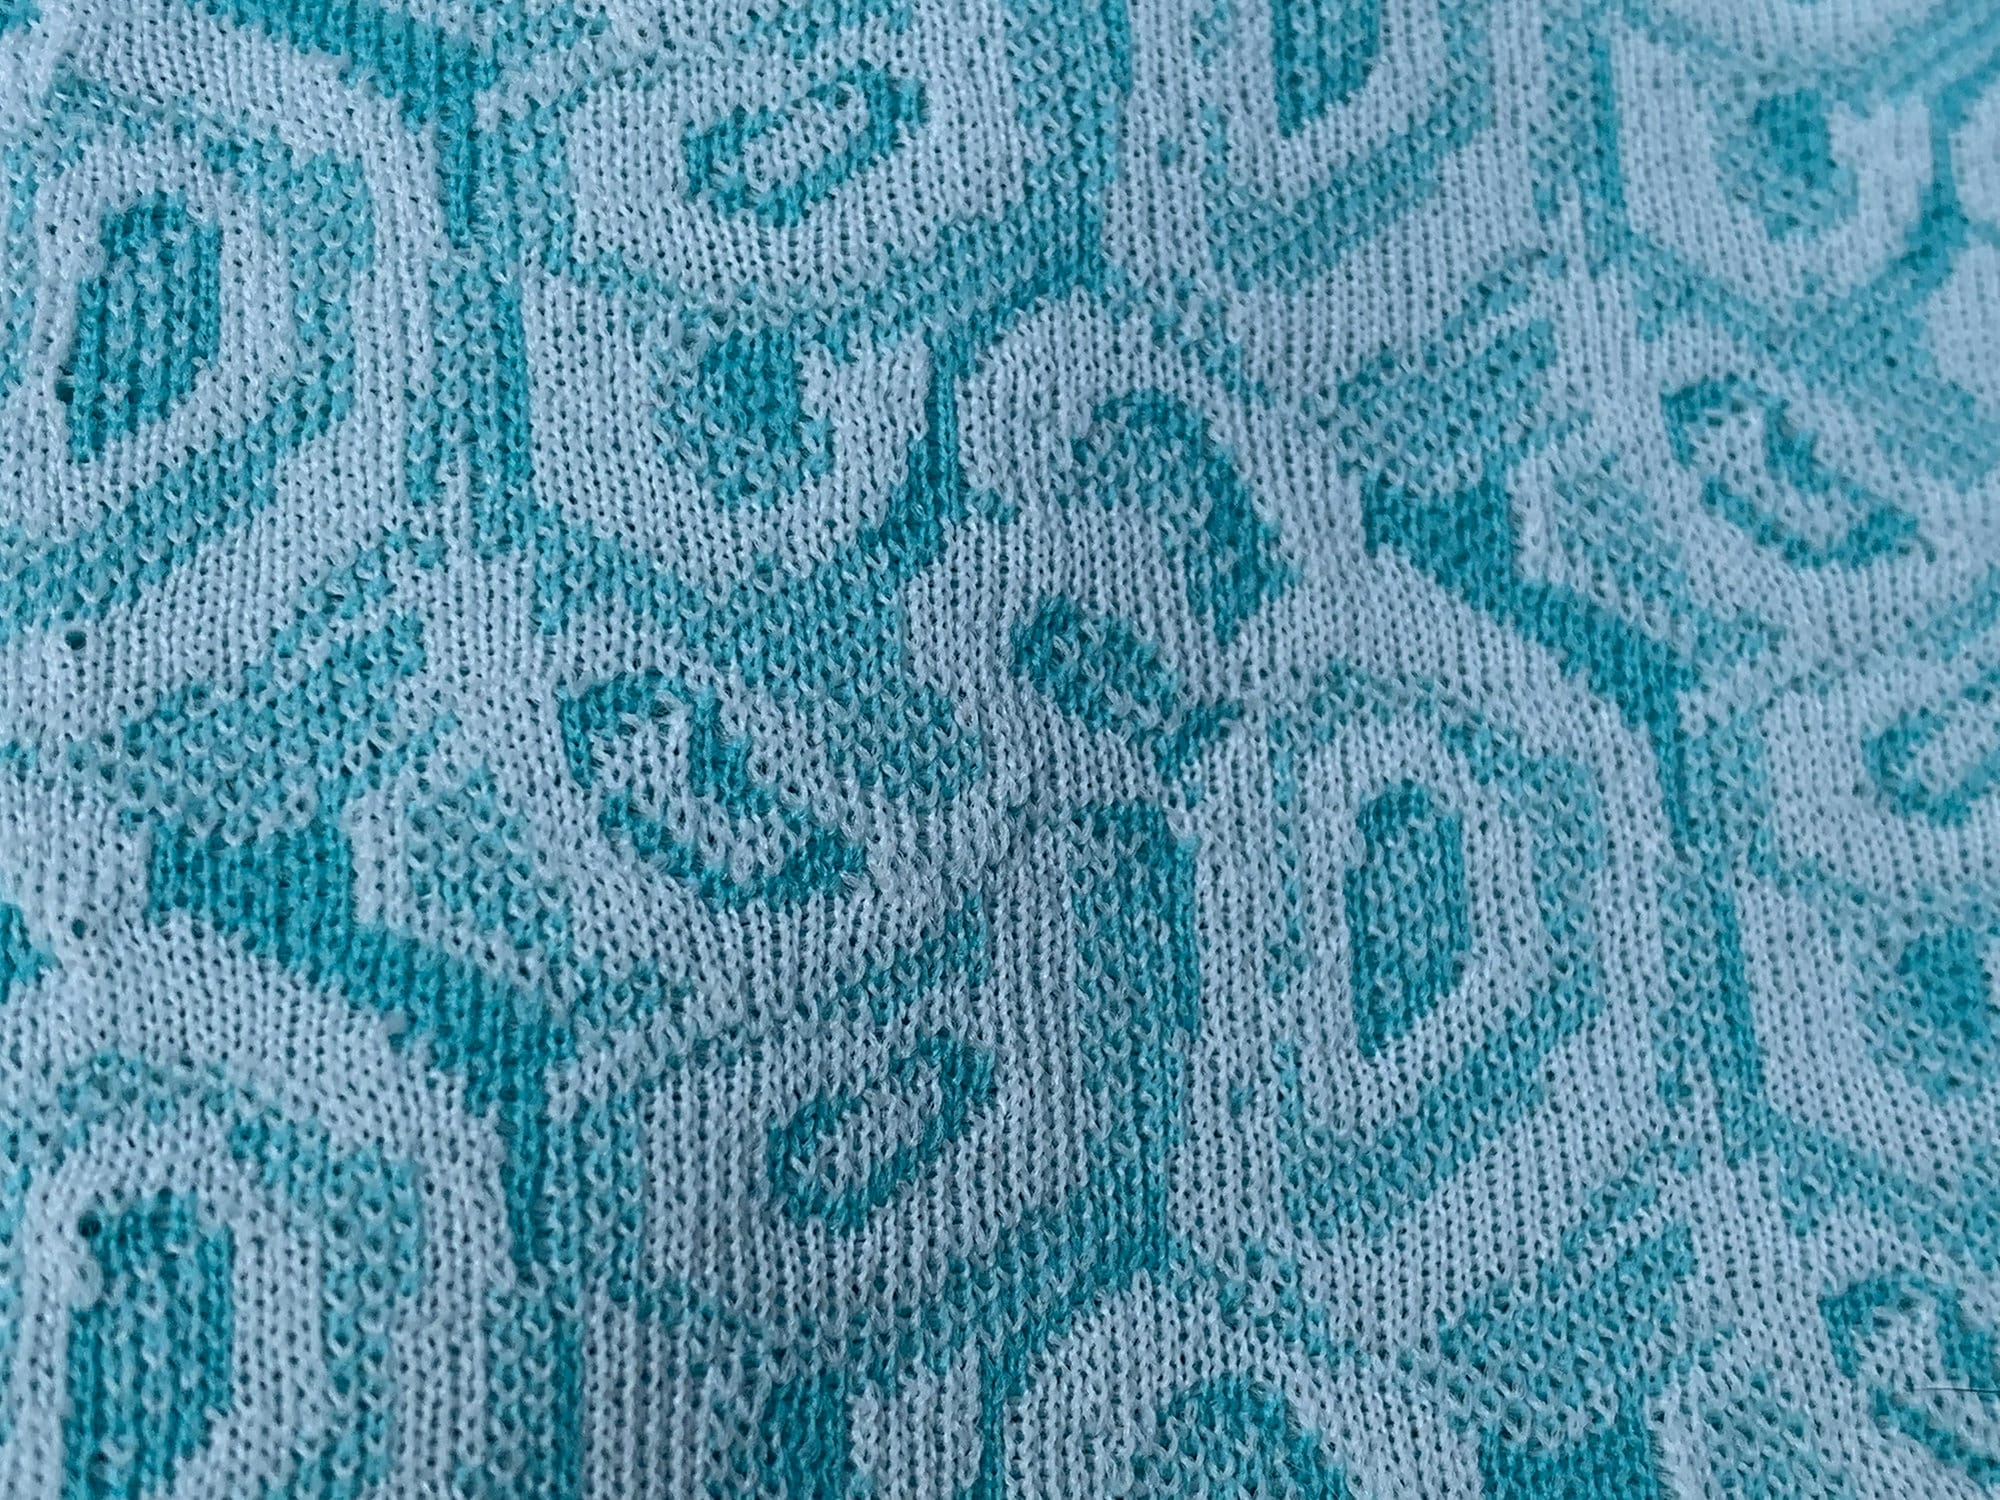 1970s fabric double knit fabric mod print vintage sewing supplies by the yard 1960s fabric Vintage fabric vintage polyester fabric